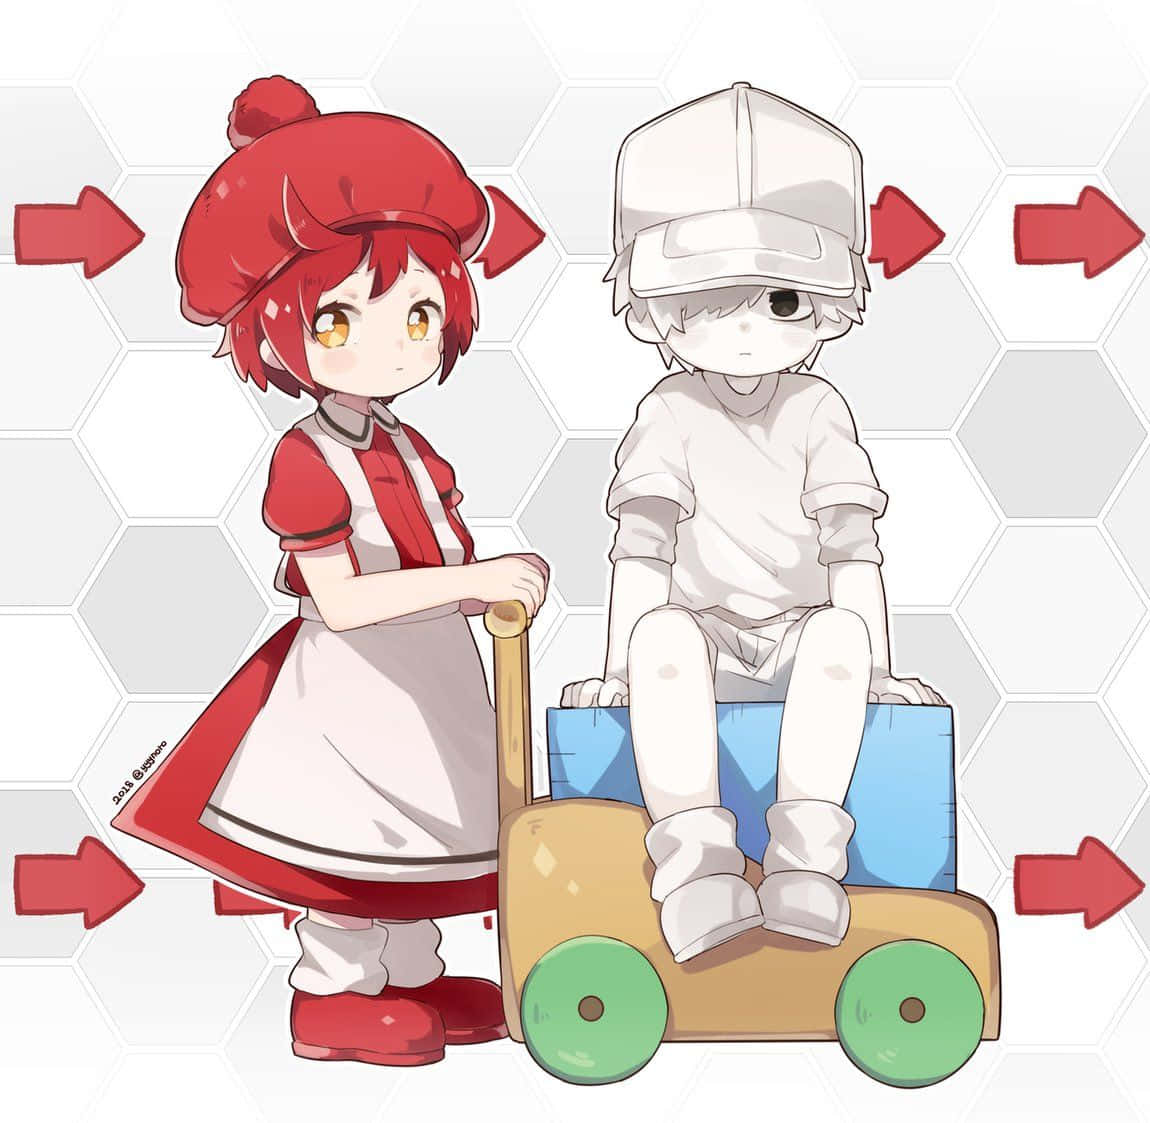 A Girl And Boy In A Red Apron Riding A Toy Truck